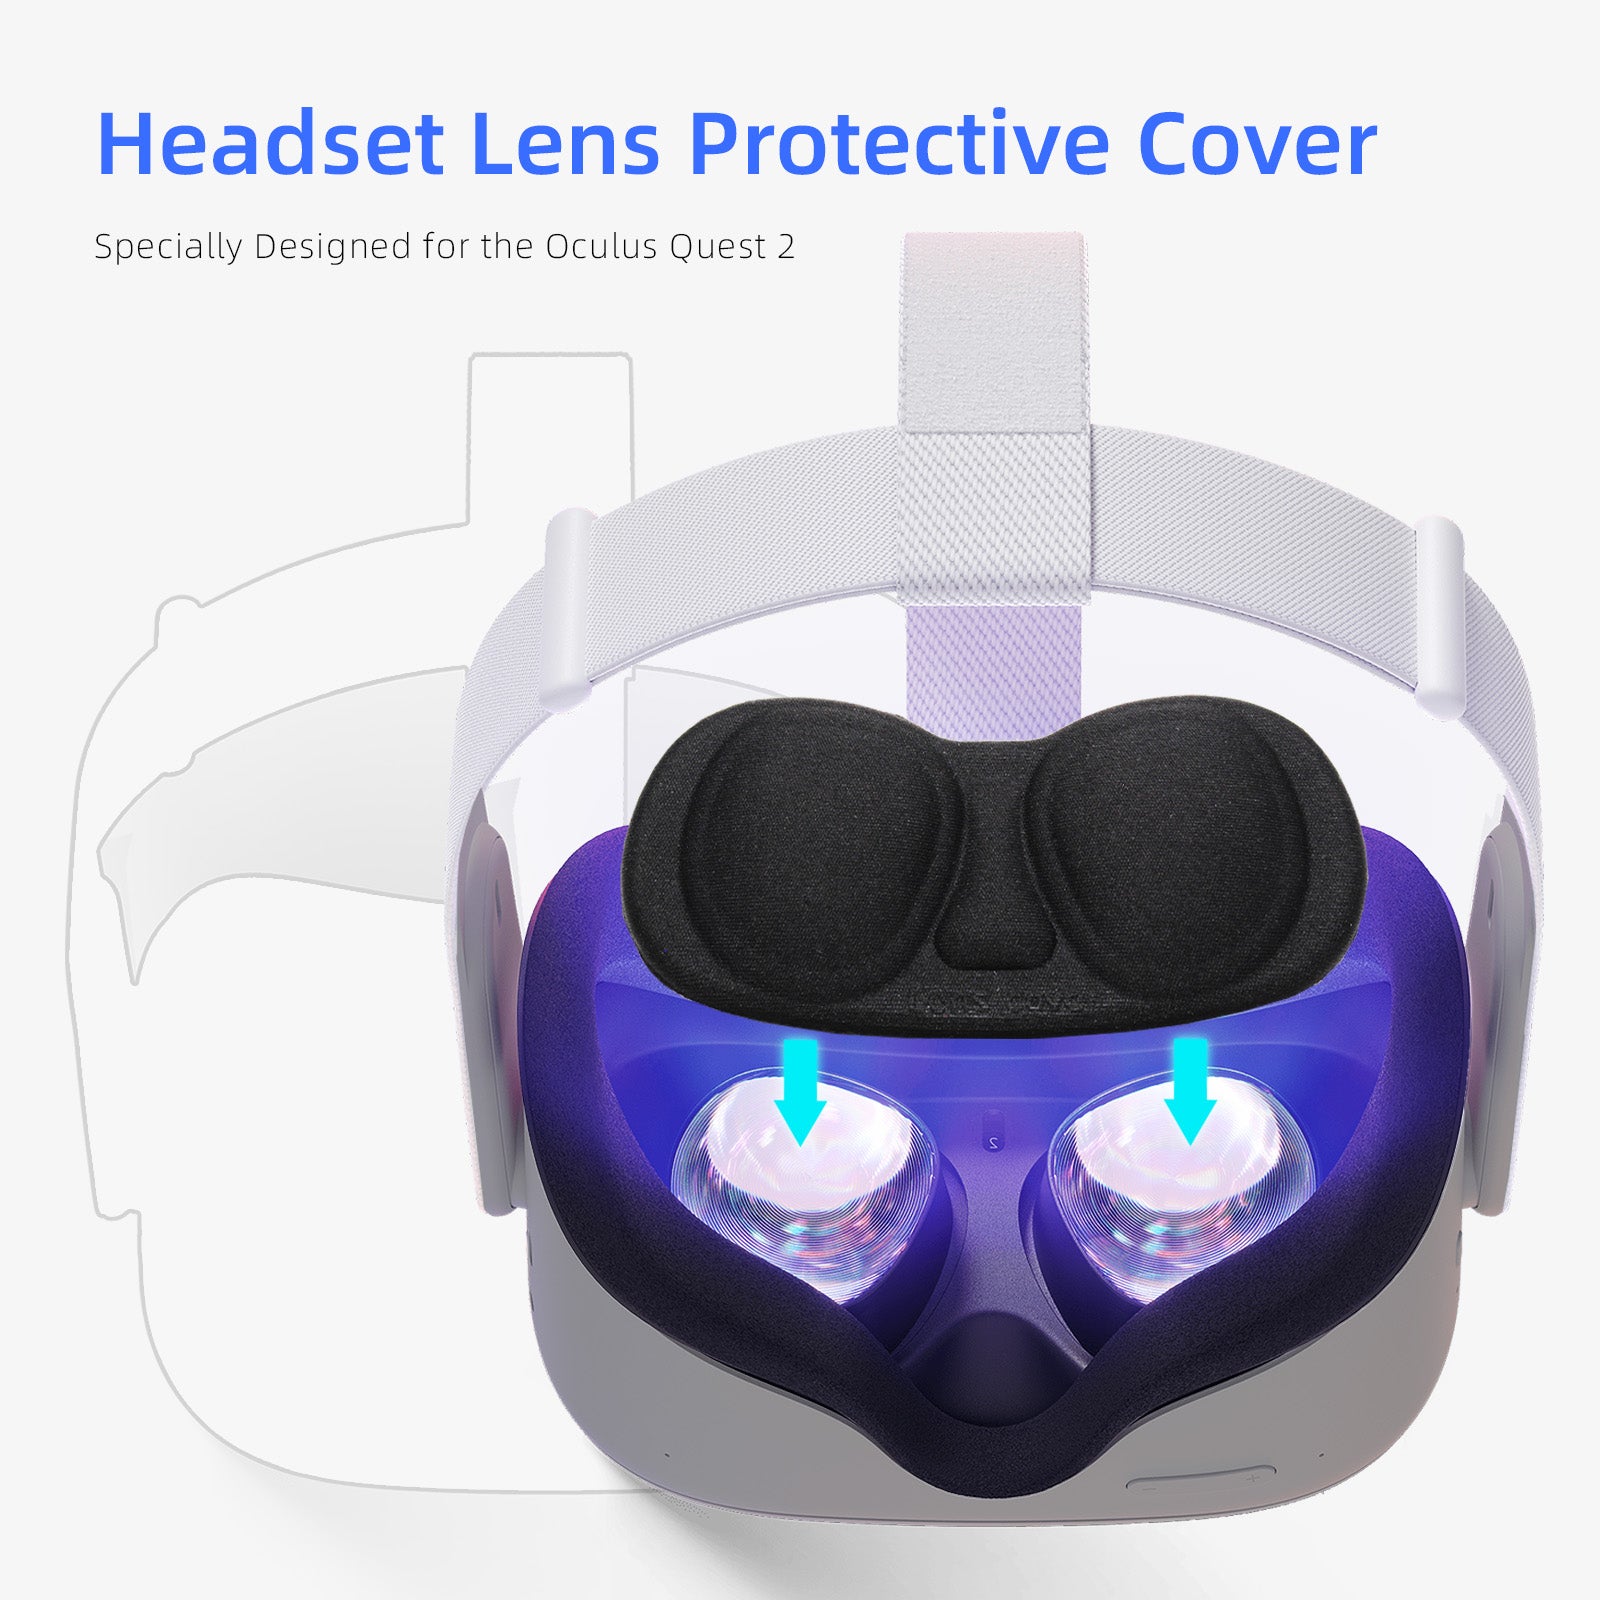 A protective cover designed specifically for VR headset lenses.